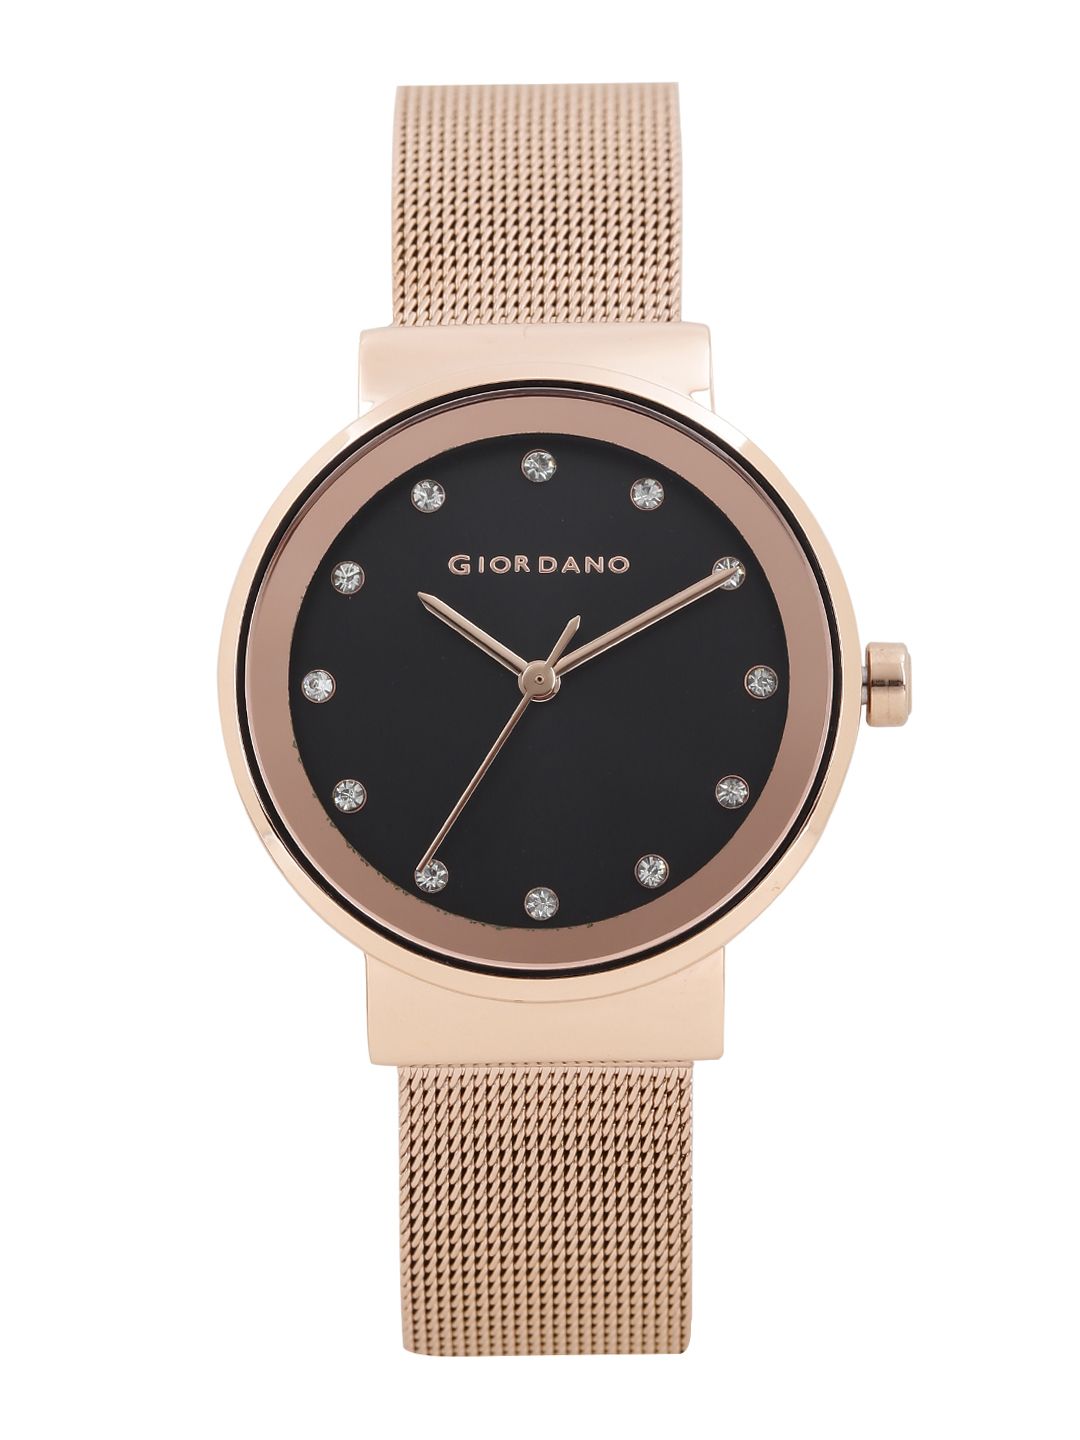 GIORDANO Women Black Analogue Watch A2047-11 Price in India